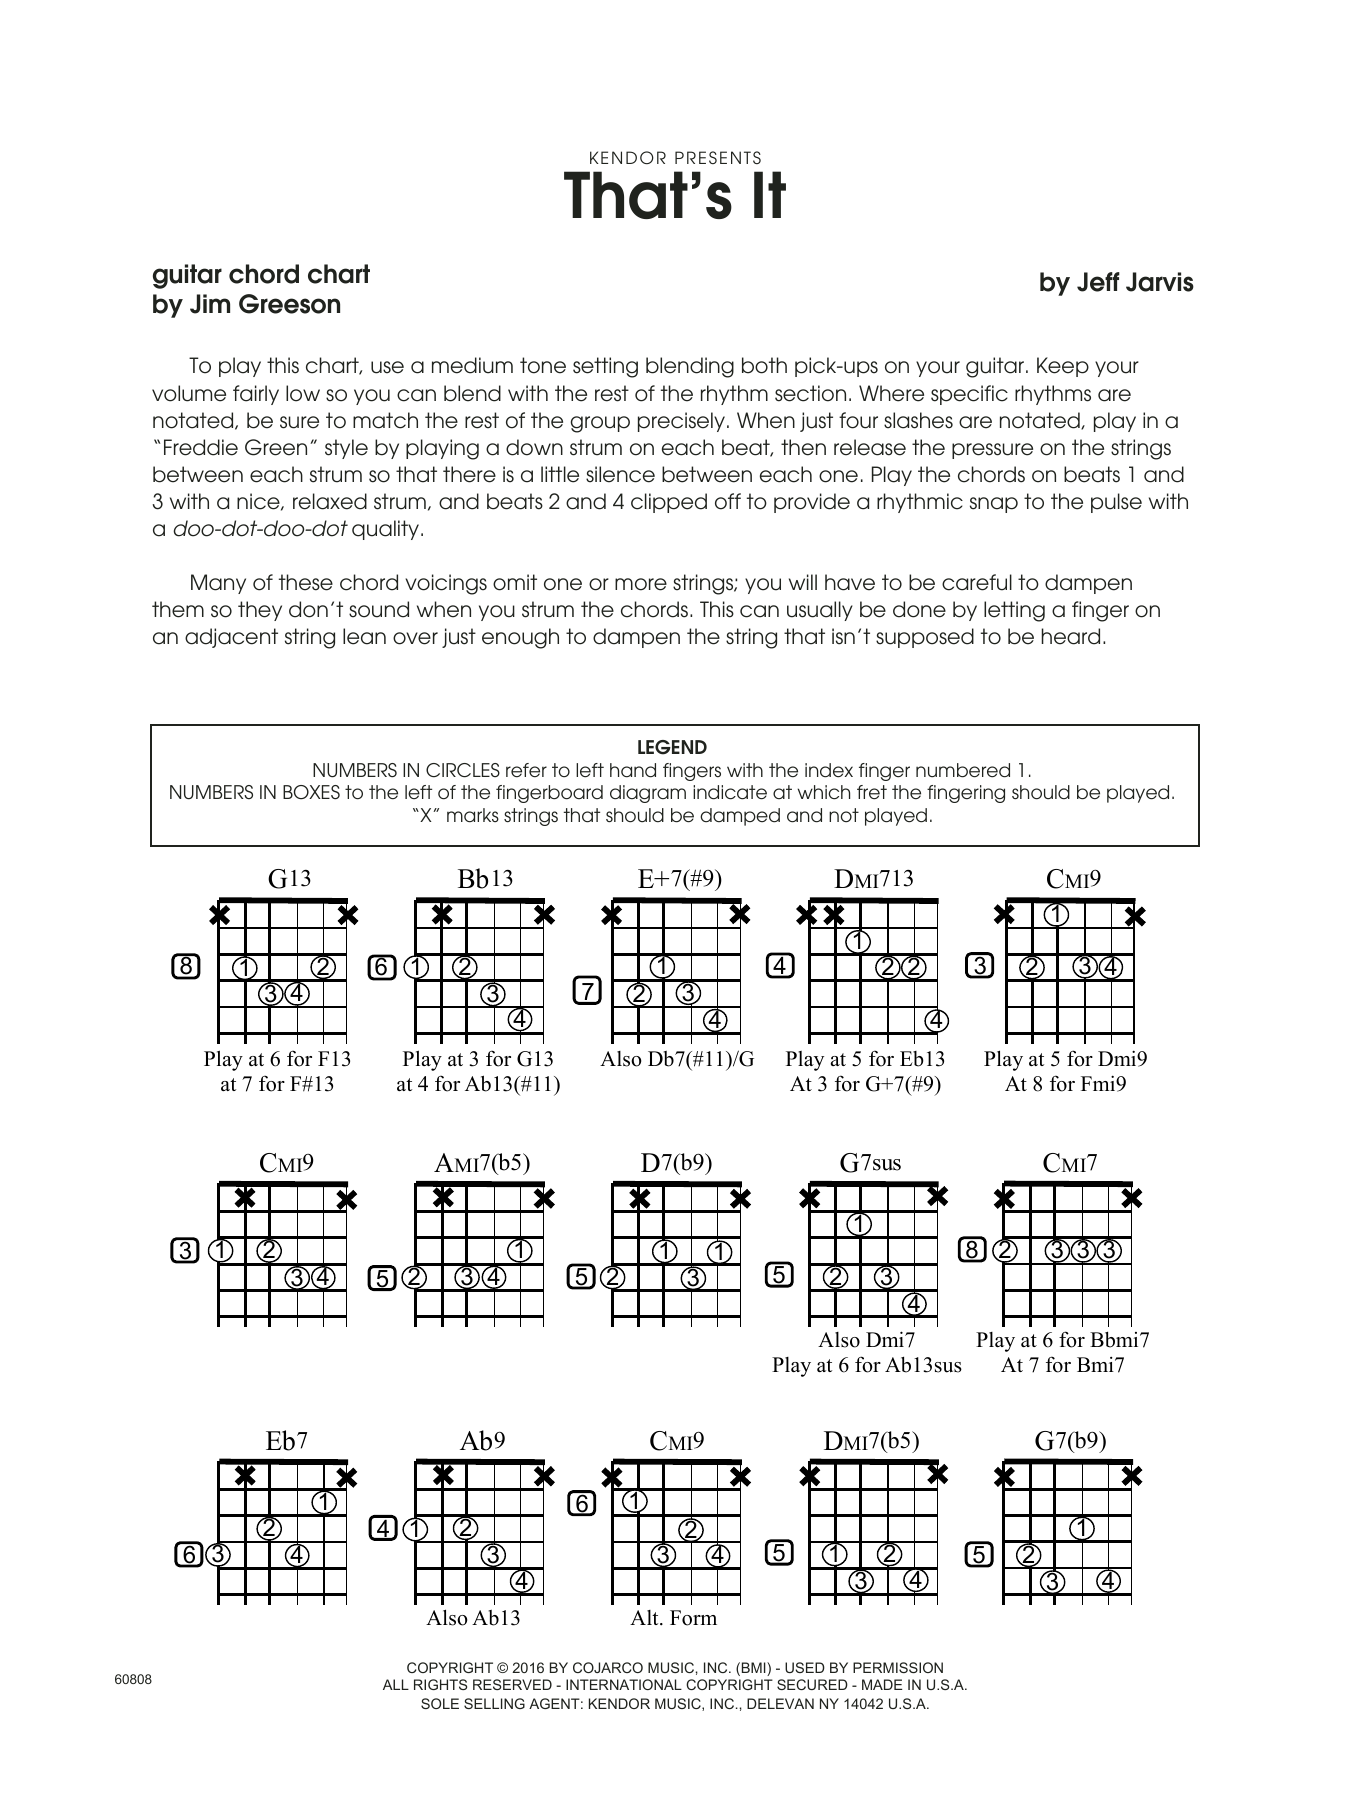 Download Jeff Jarvis That's It - Guitar Chord Chart Sheet Music